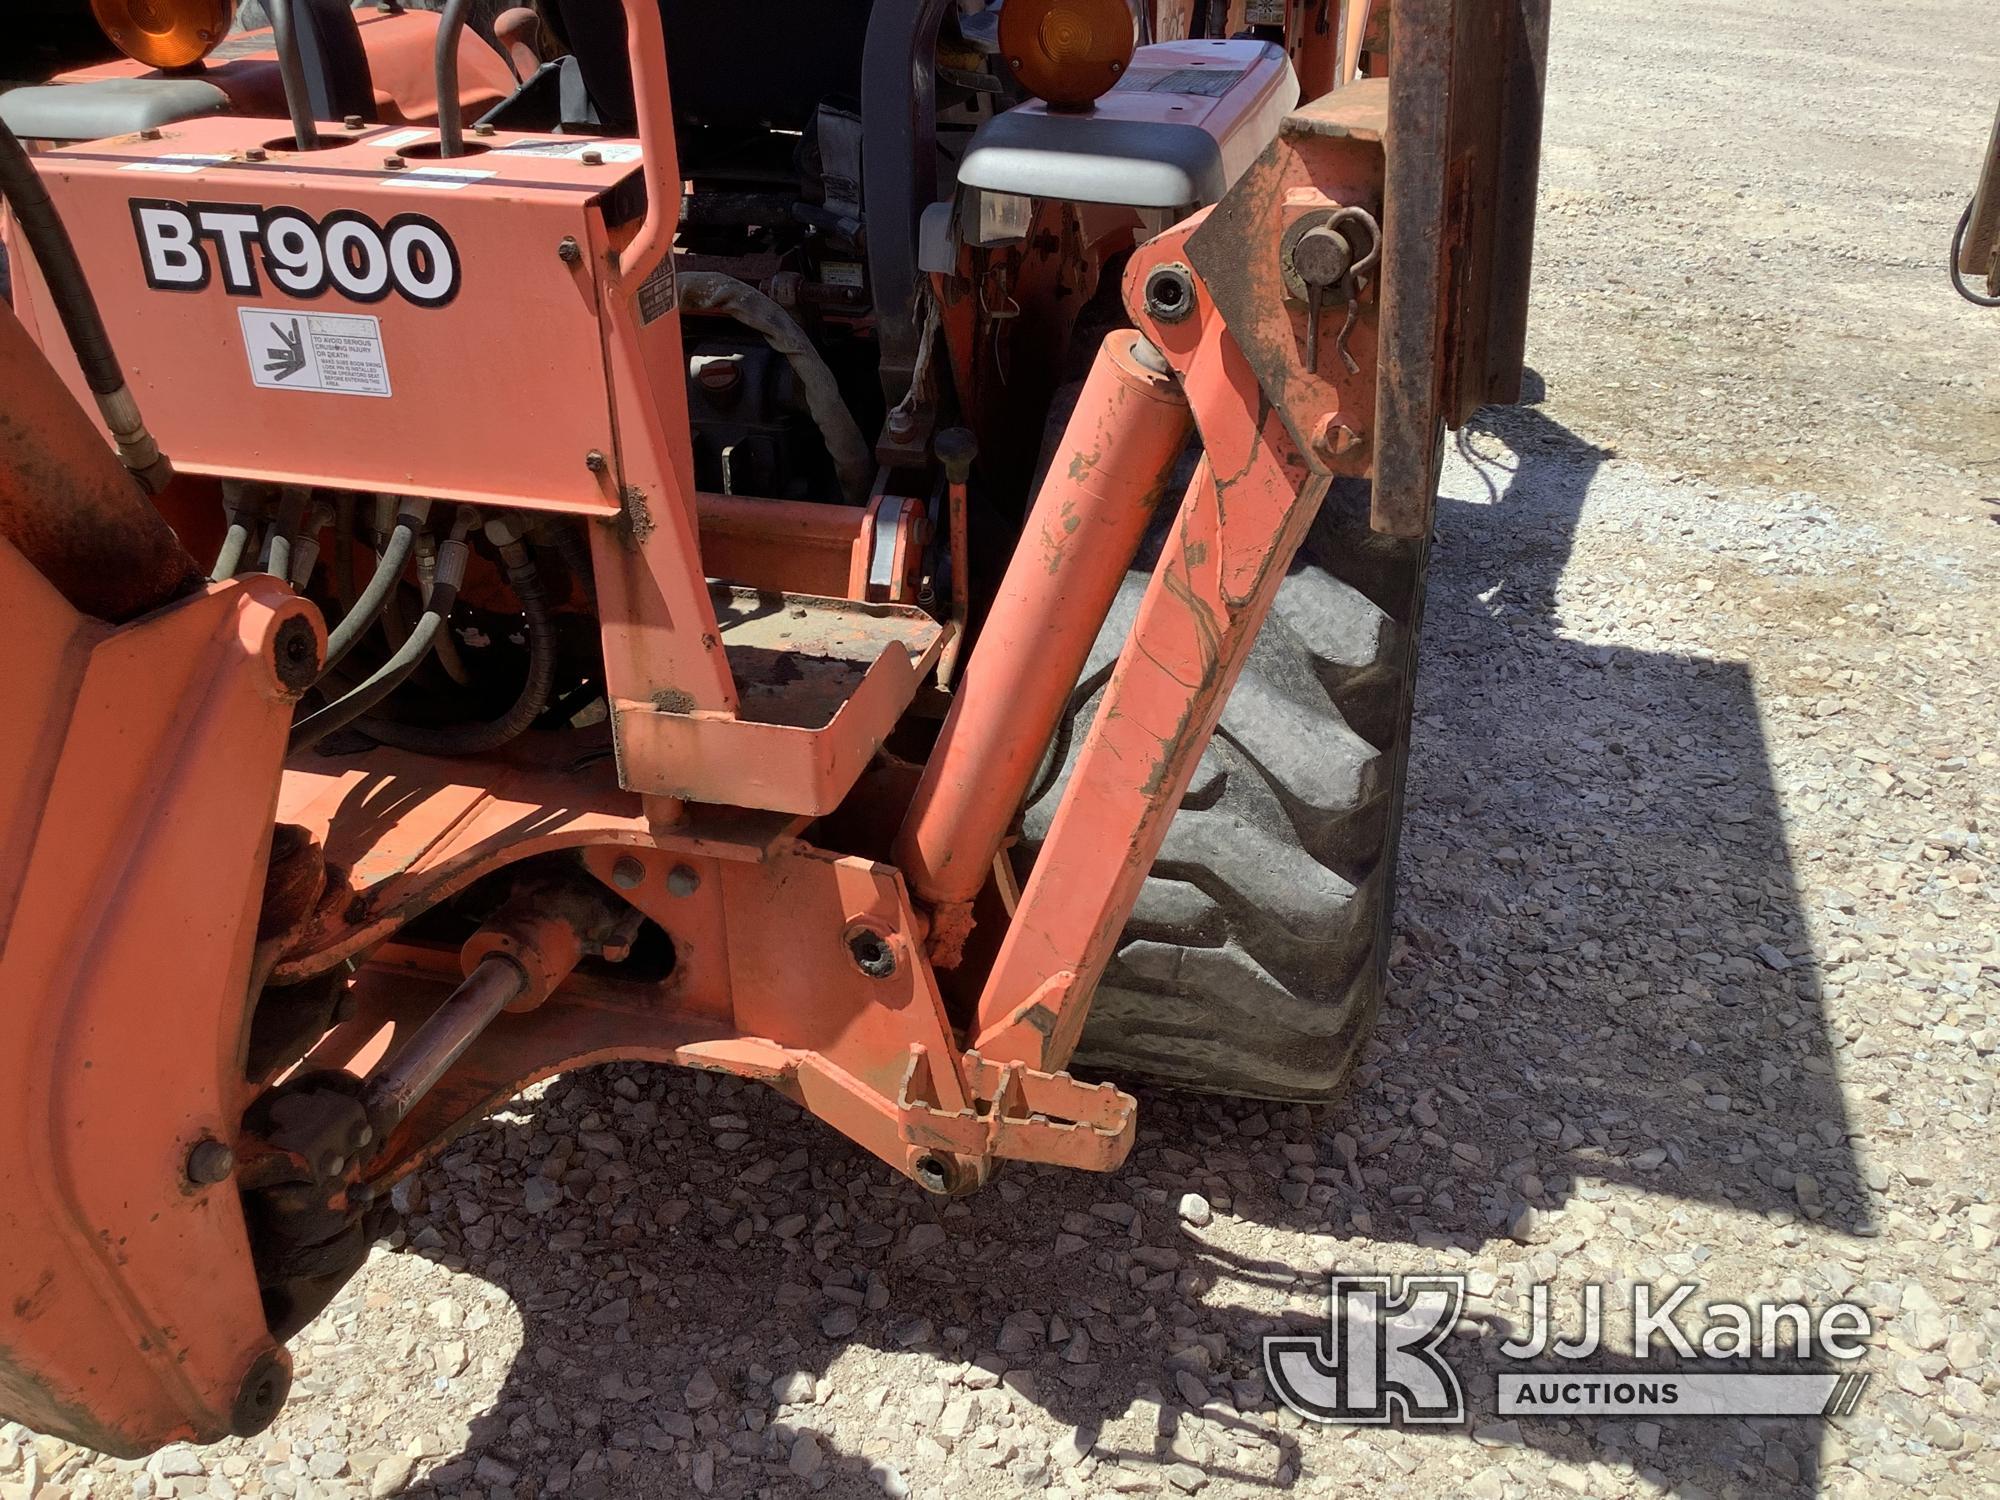 (Smock, PA) 1998 Kubota L35 Mini Tractor Loader Backhoe Not Running, Operational Condition Unknown,